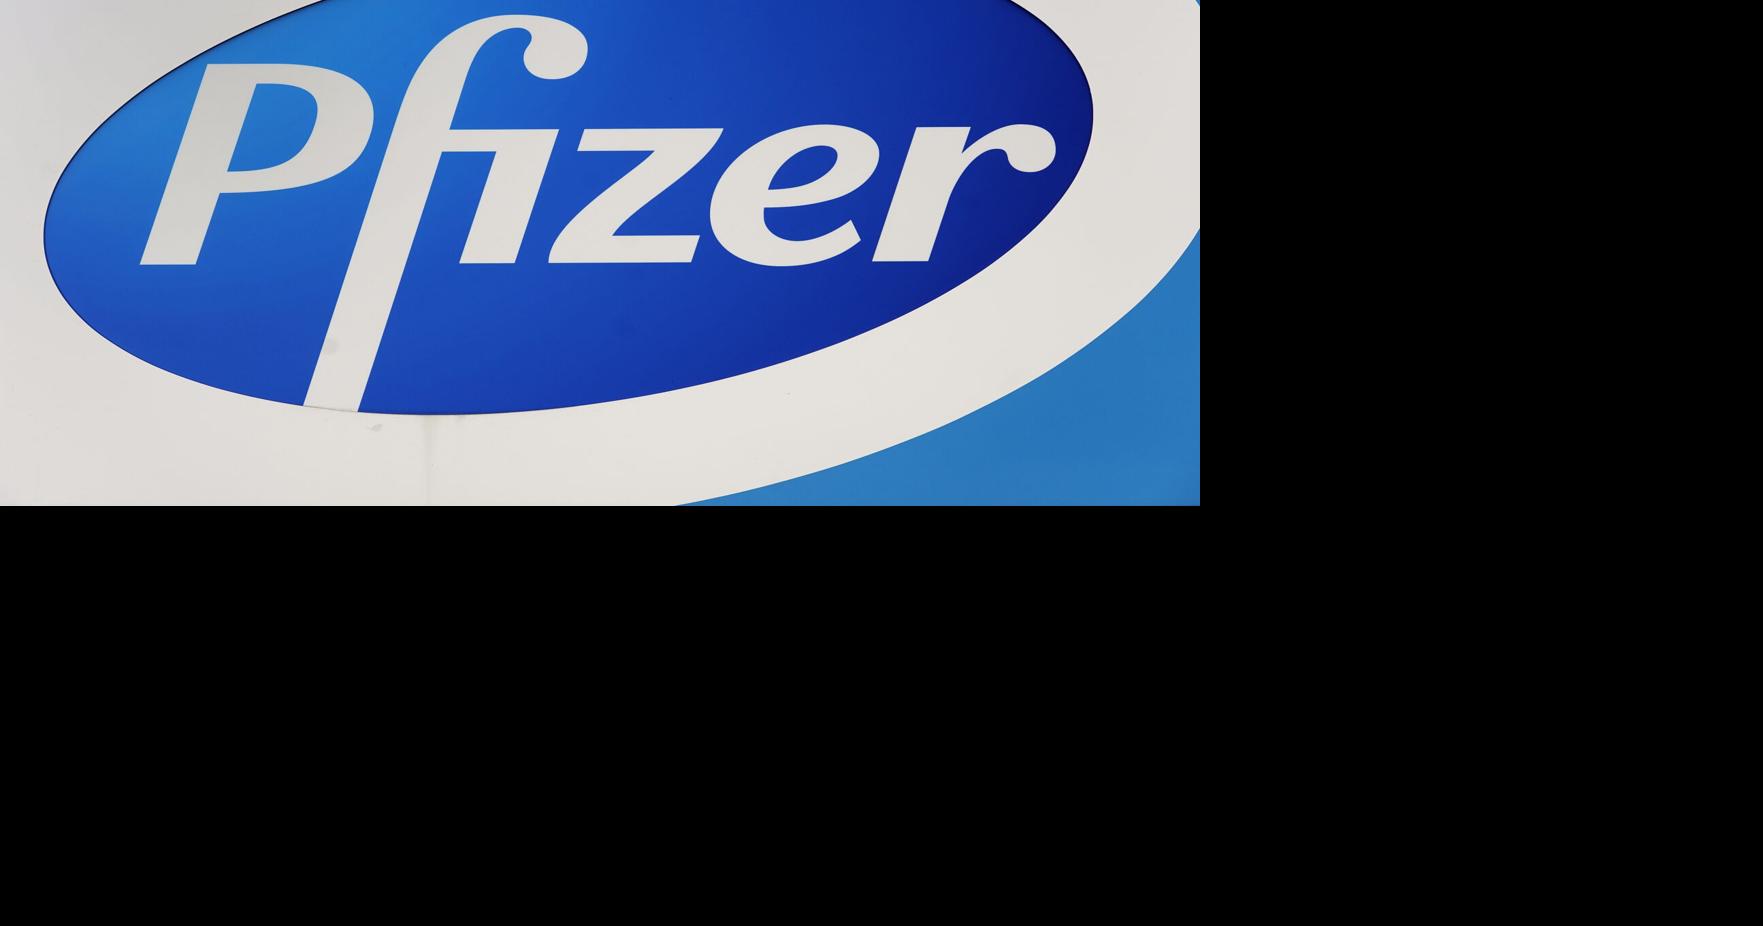 Posts distort data on Pfizer COVID-19 vaccine and pregnancy